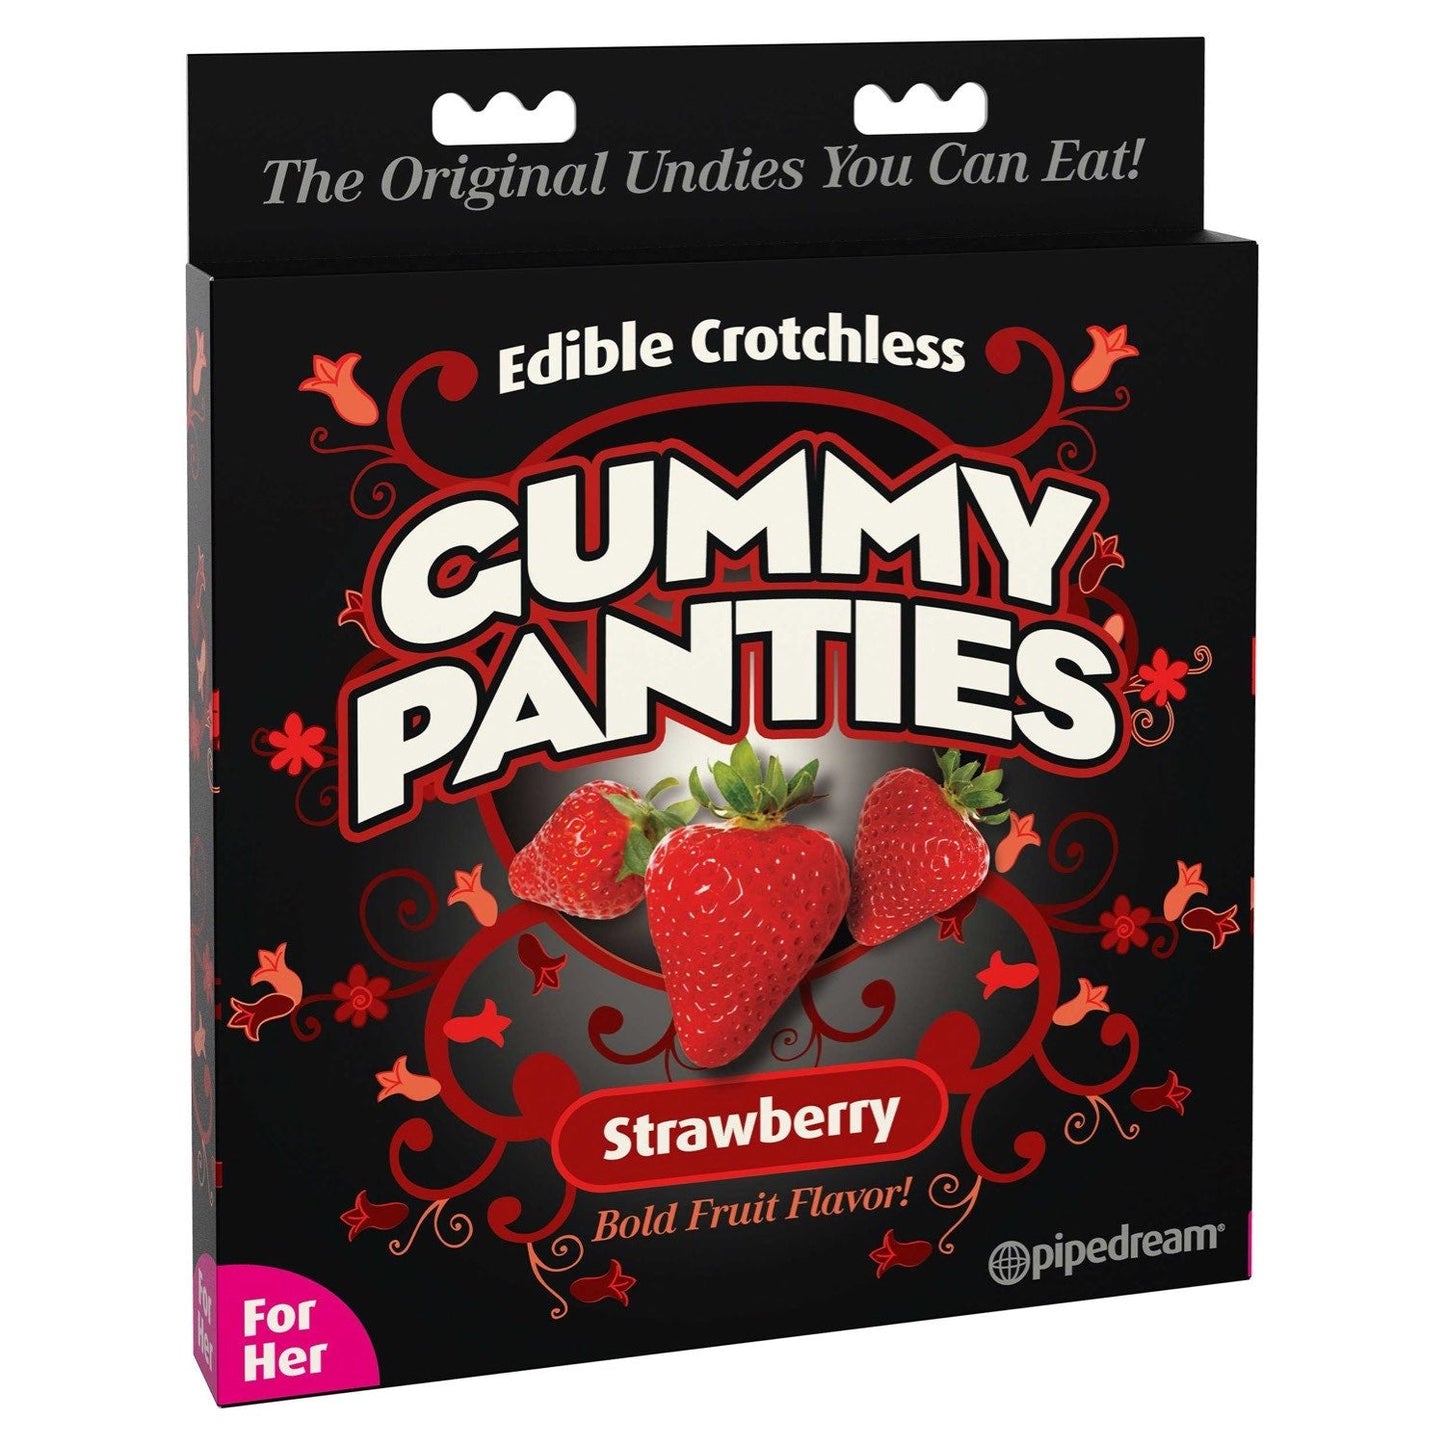 Gummy Panties - Strawberry Flavoured Edible Crotchless Panties